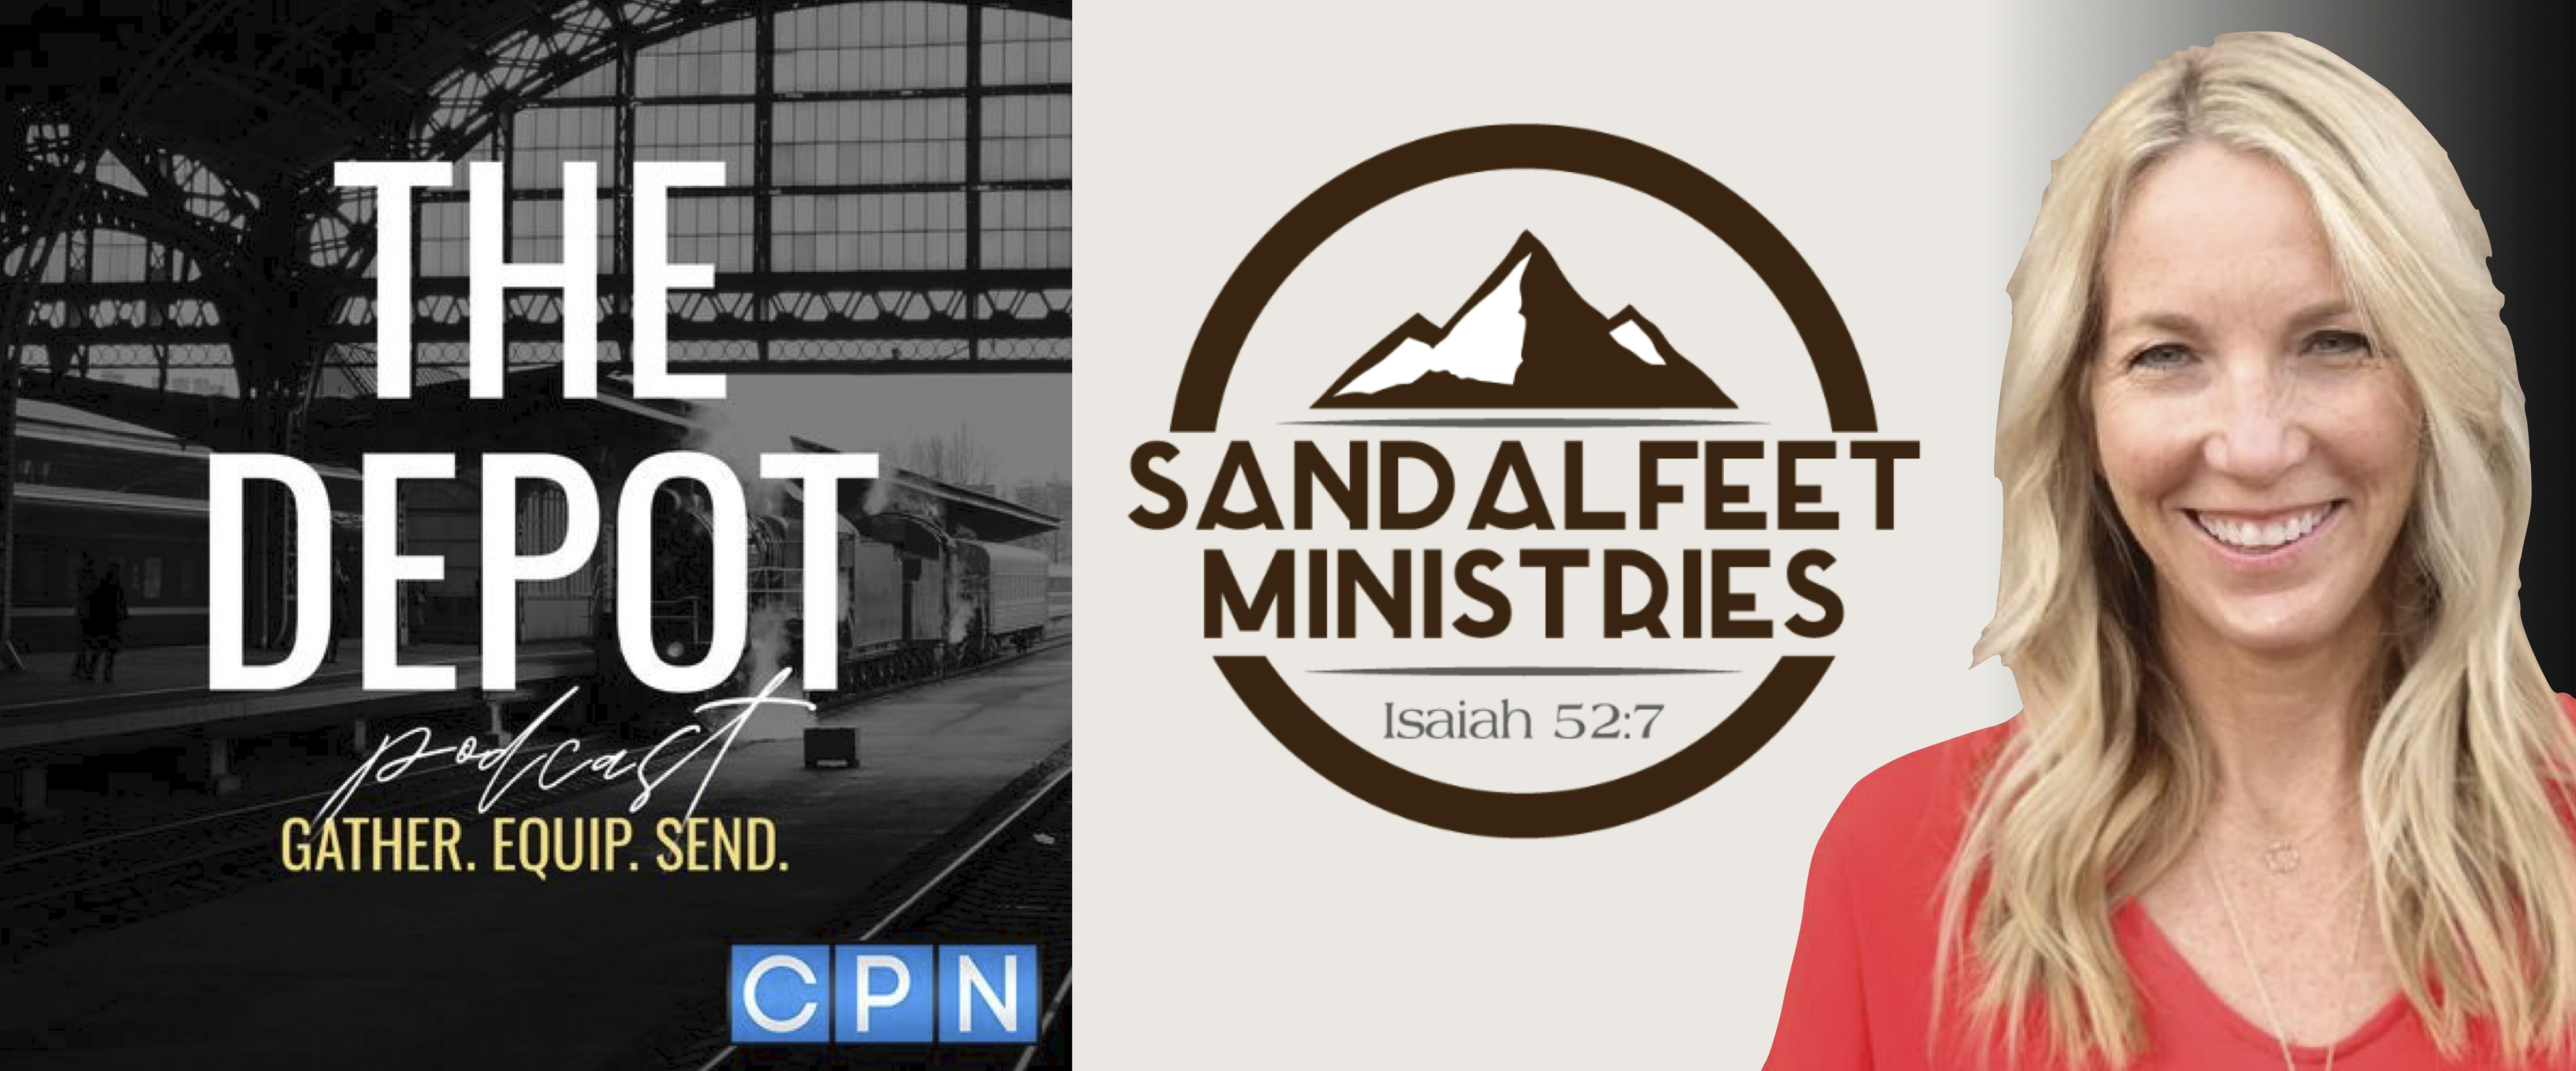 THE DEPOT PODCAST: Two Things Are Necessary for Order in the Church